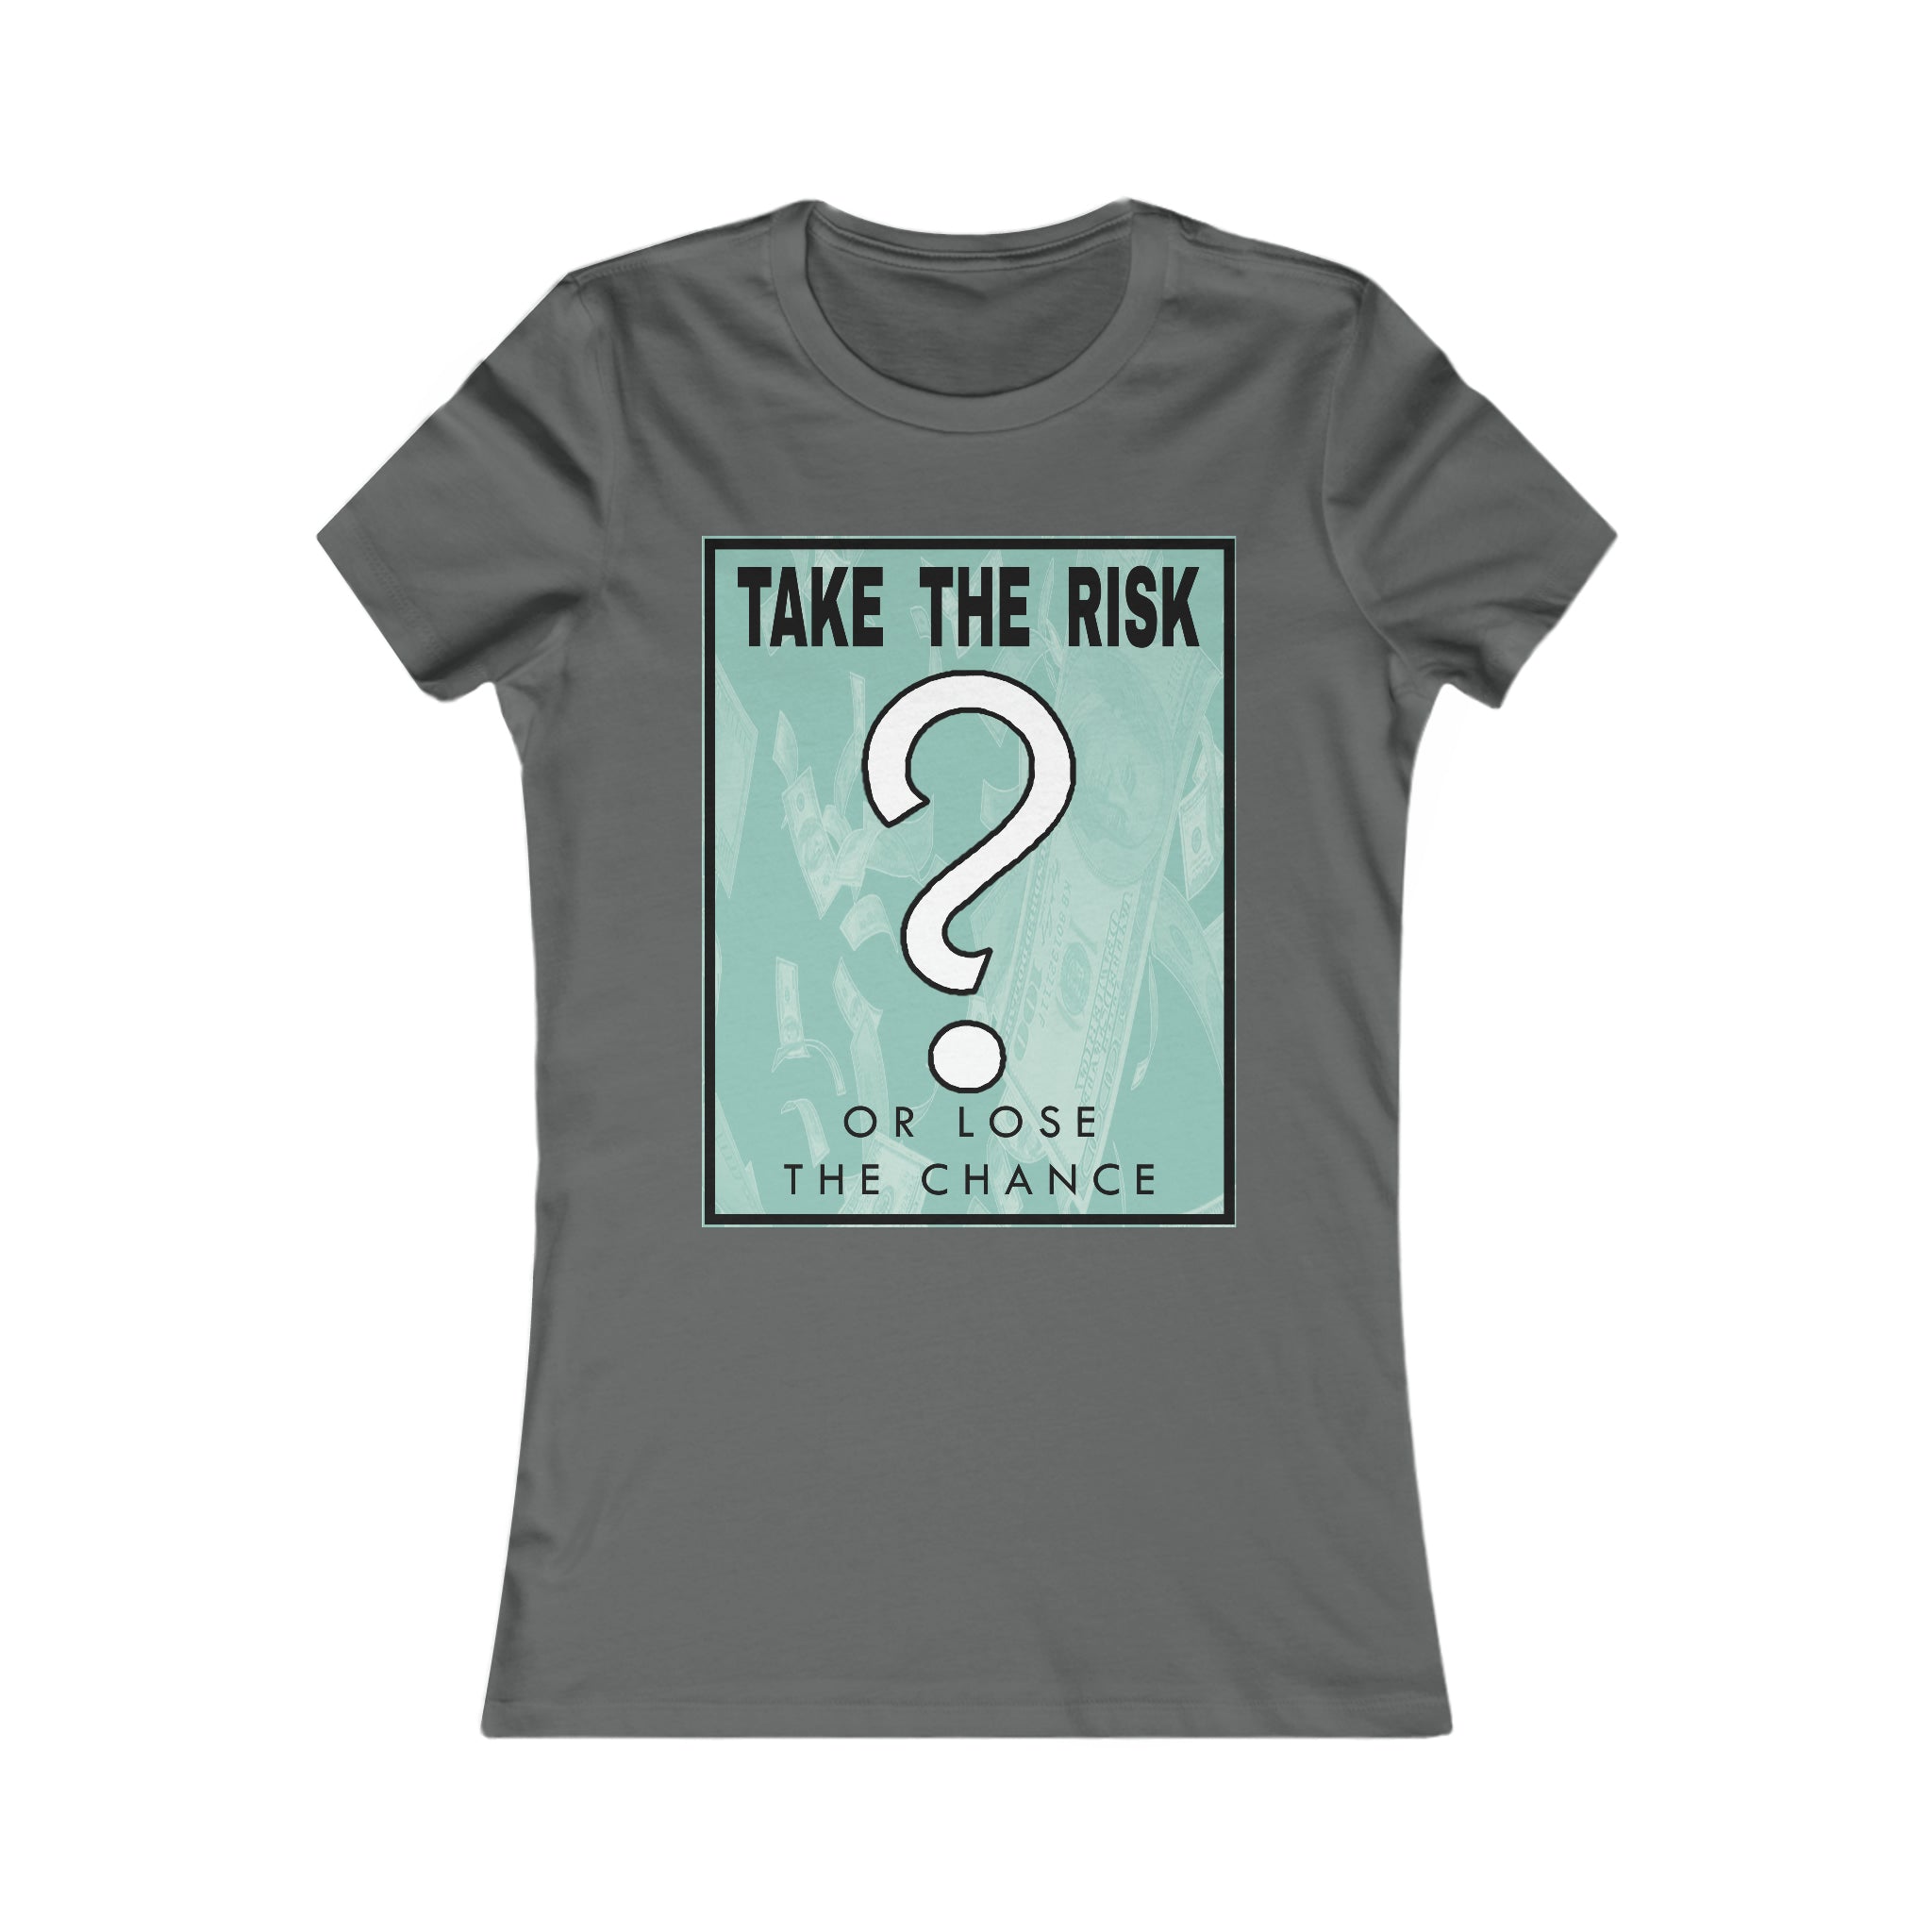 Take The Risk - Women's Tee